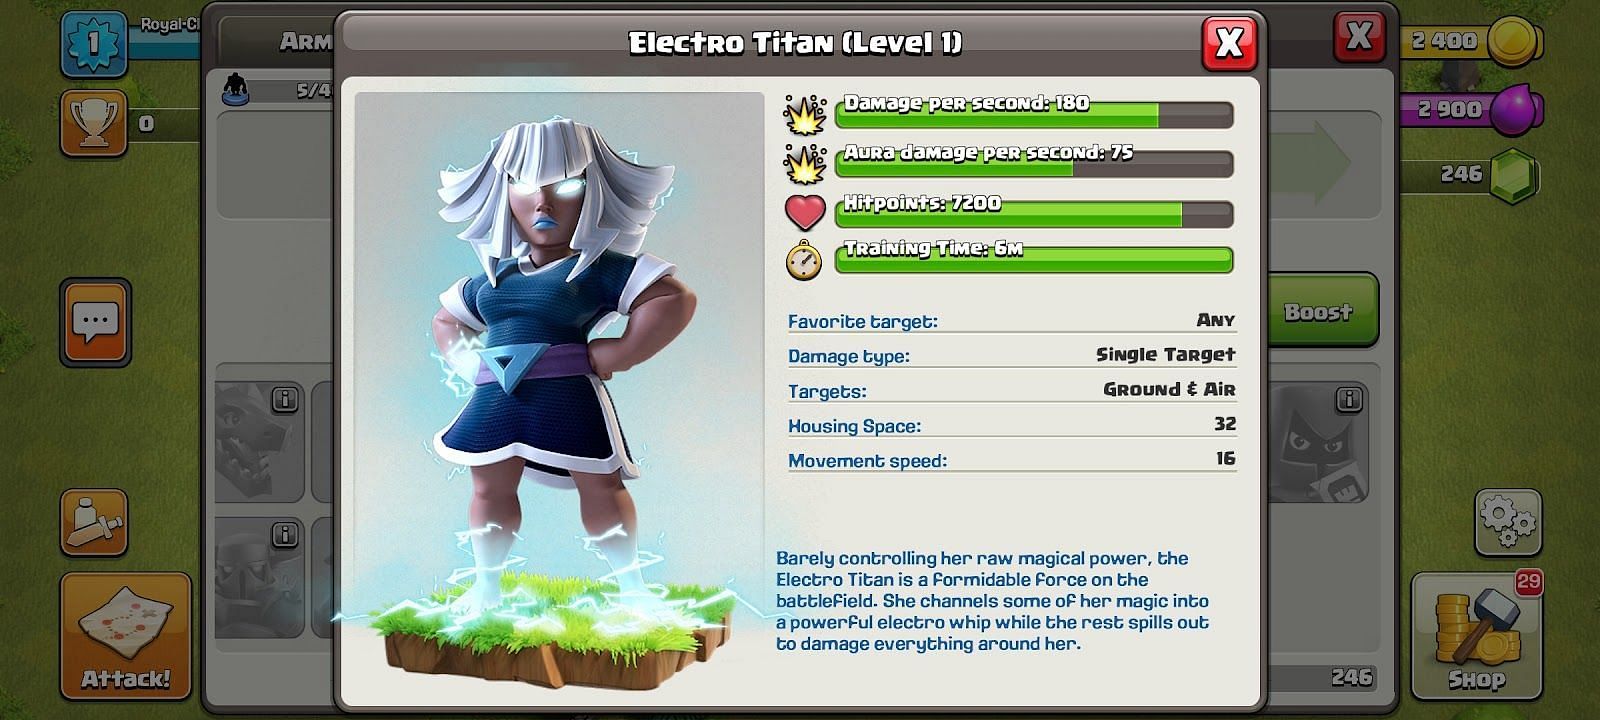 Non-upgradable stats for Electro Titan (Image via Supercell)